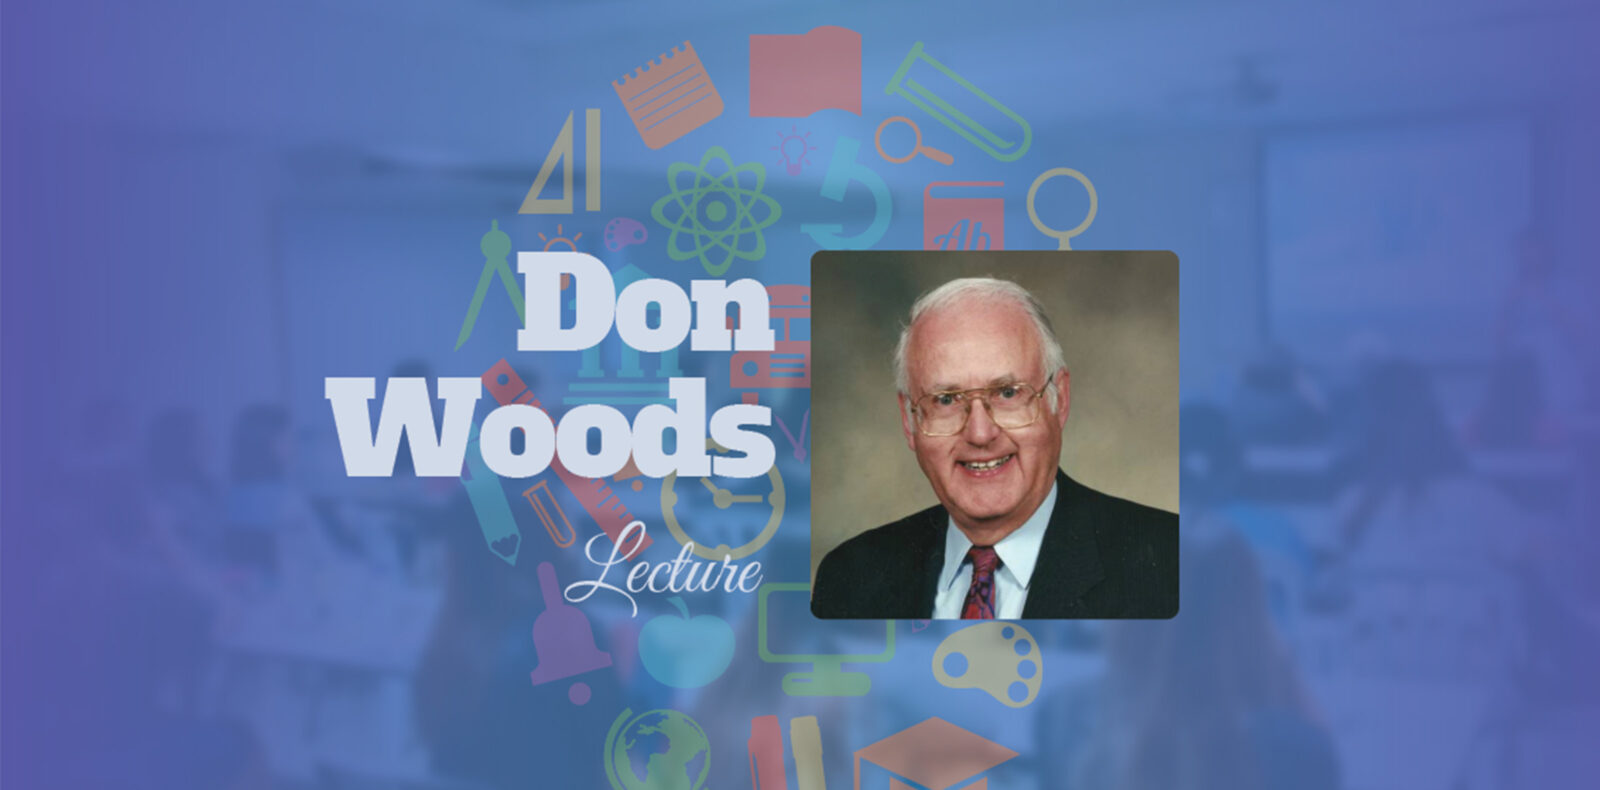 Don Woods lecture series